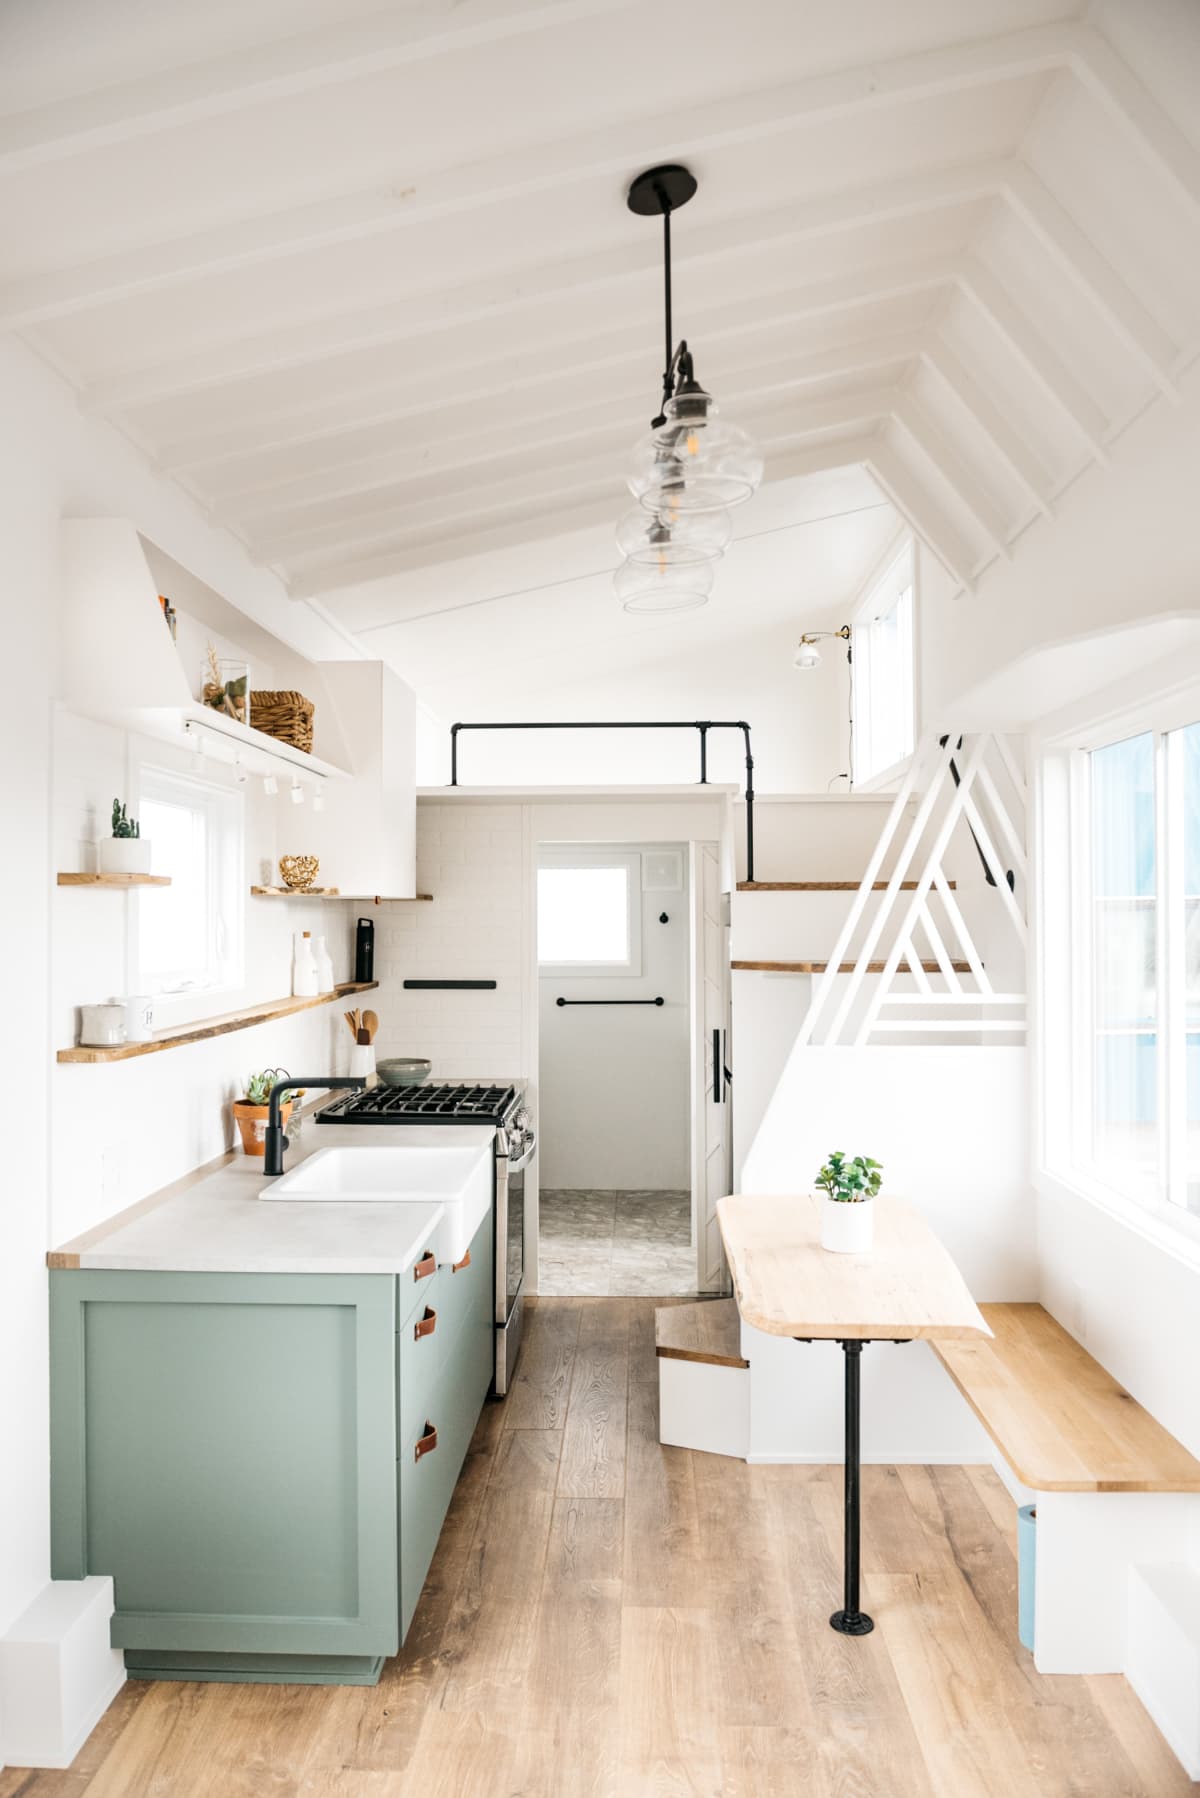 Interior Decor shot of Tiny House on a trailer, featuring a small space kitchen, bedroom, and bathroom.